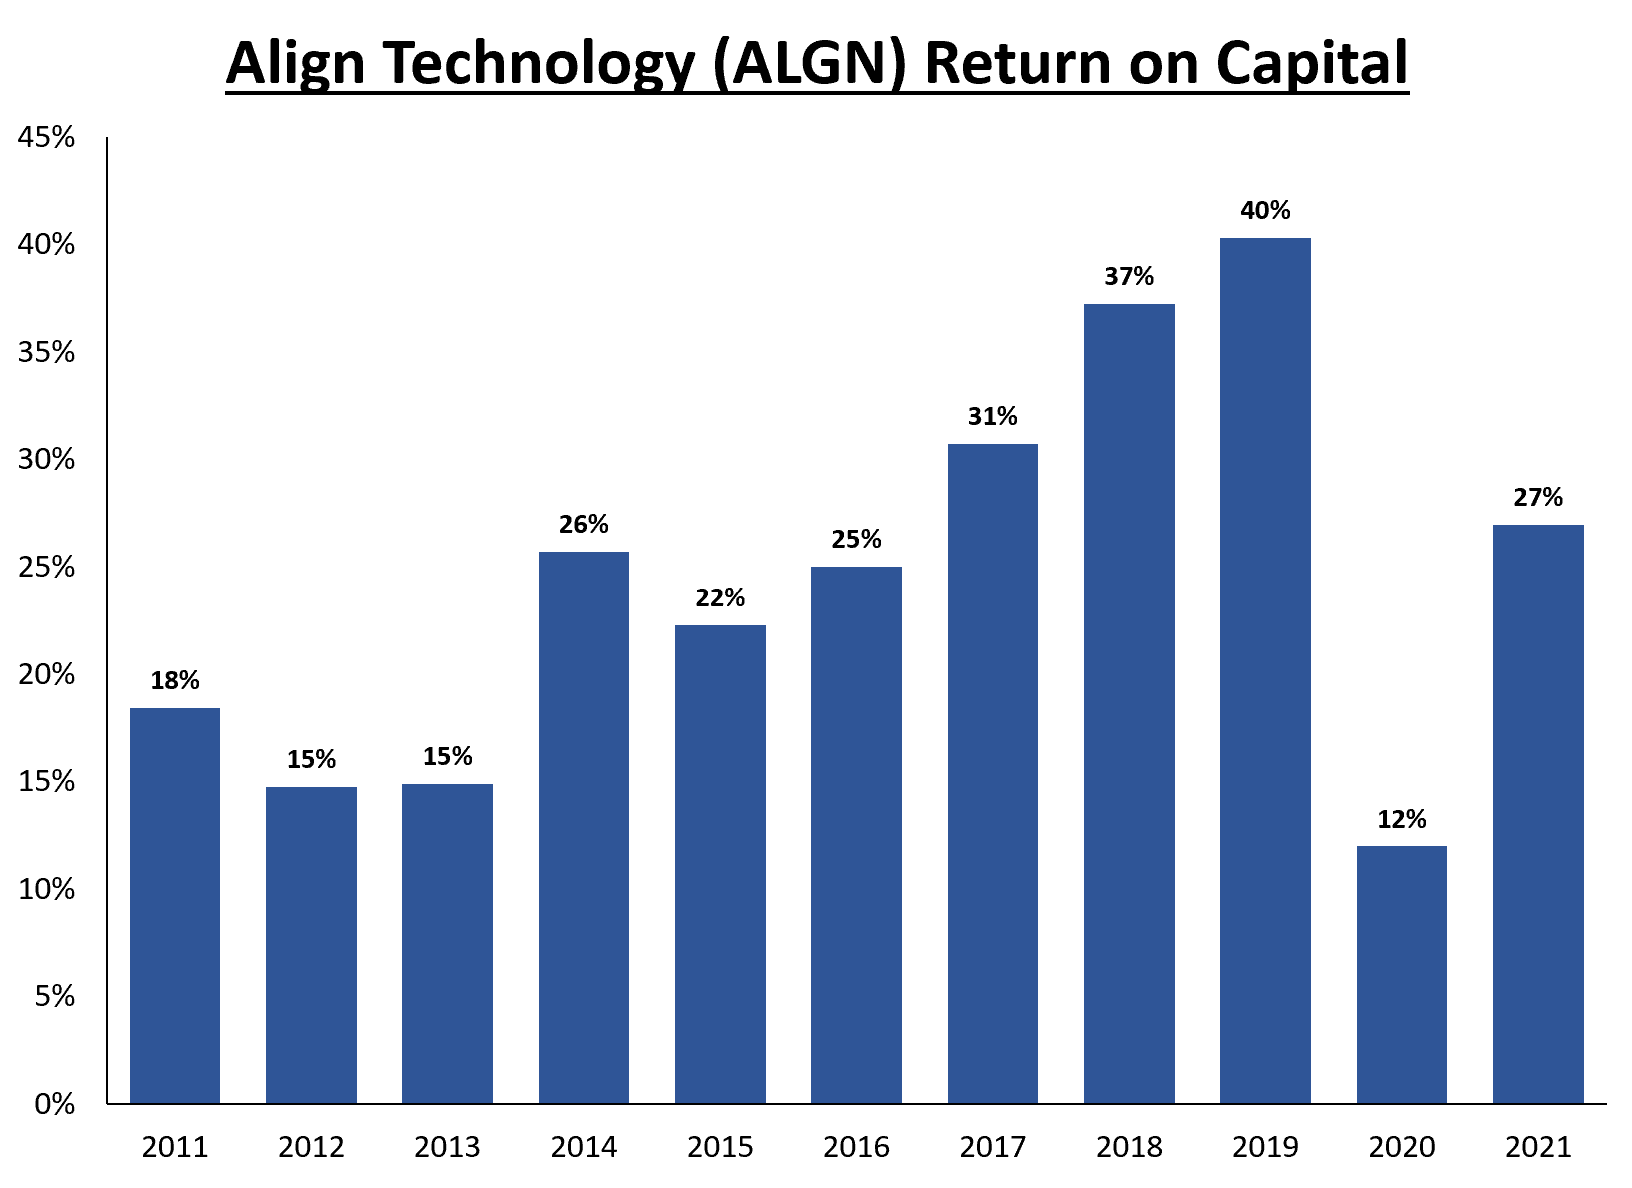 Align Technology (ALGN) Gains From Innovation, Macro Issues Ail